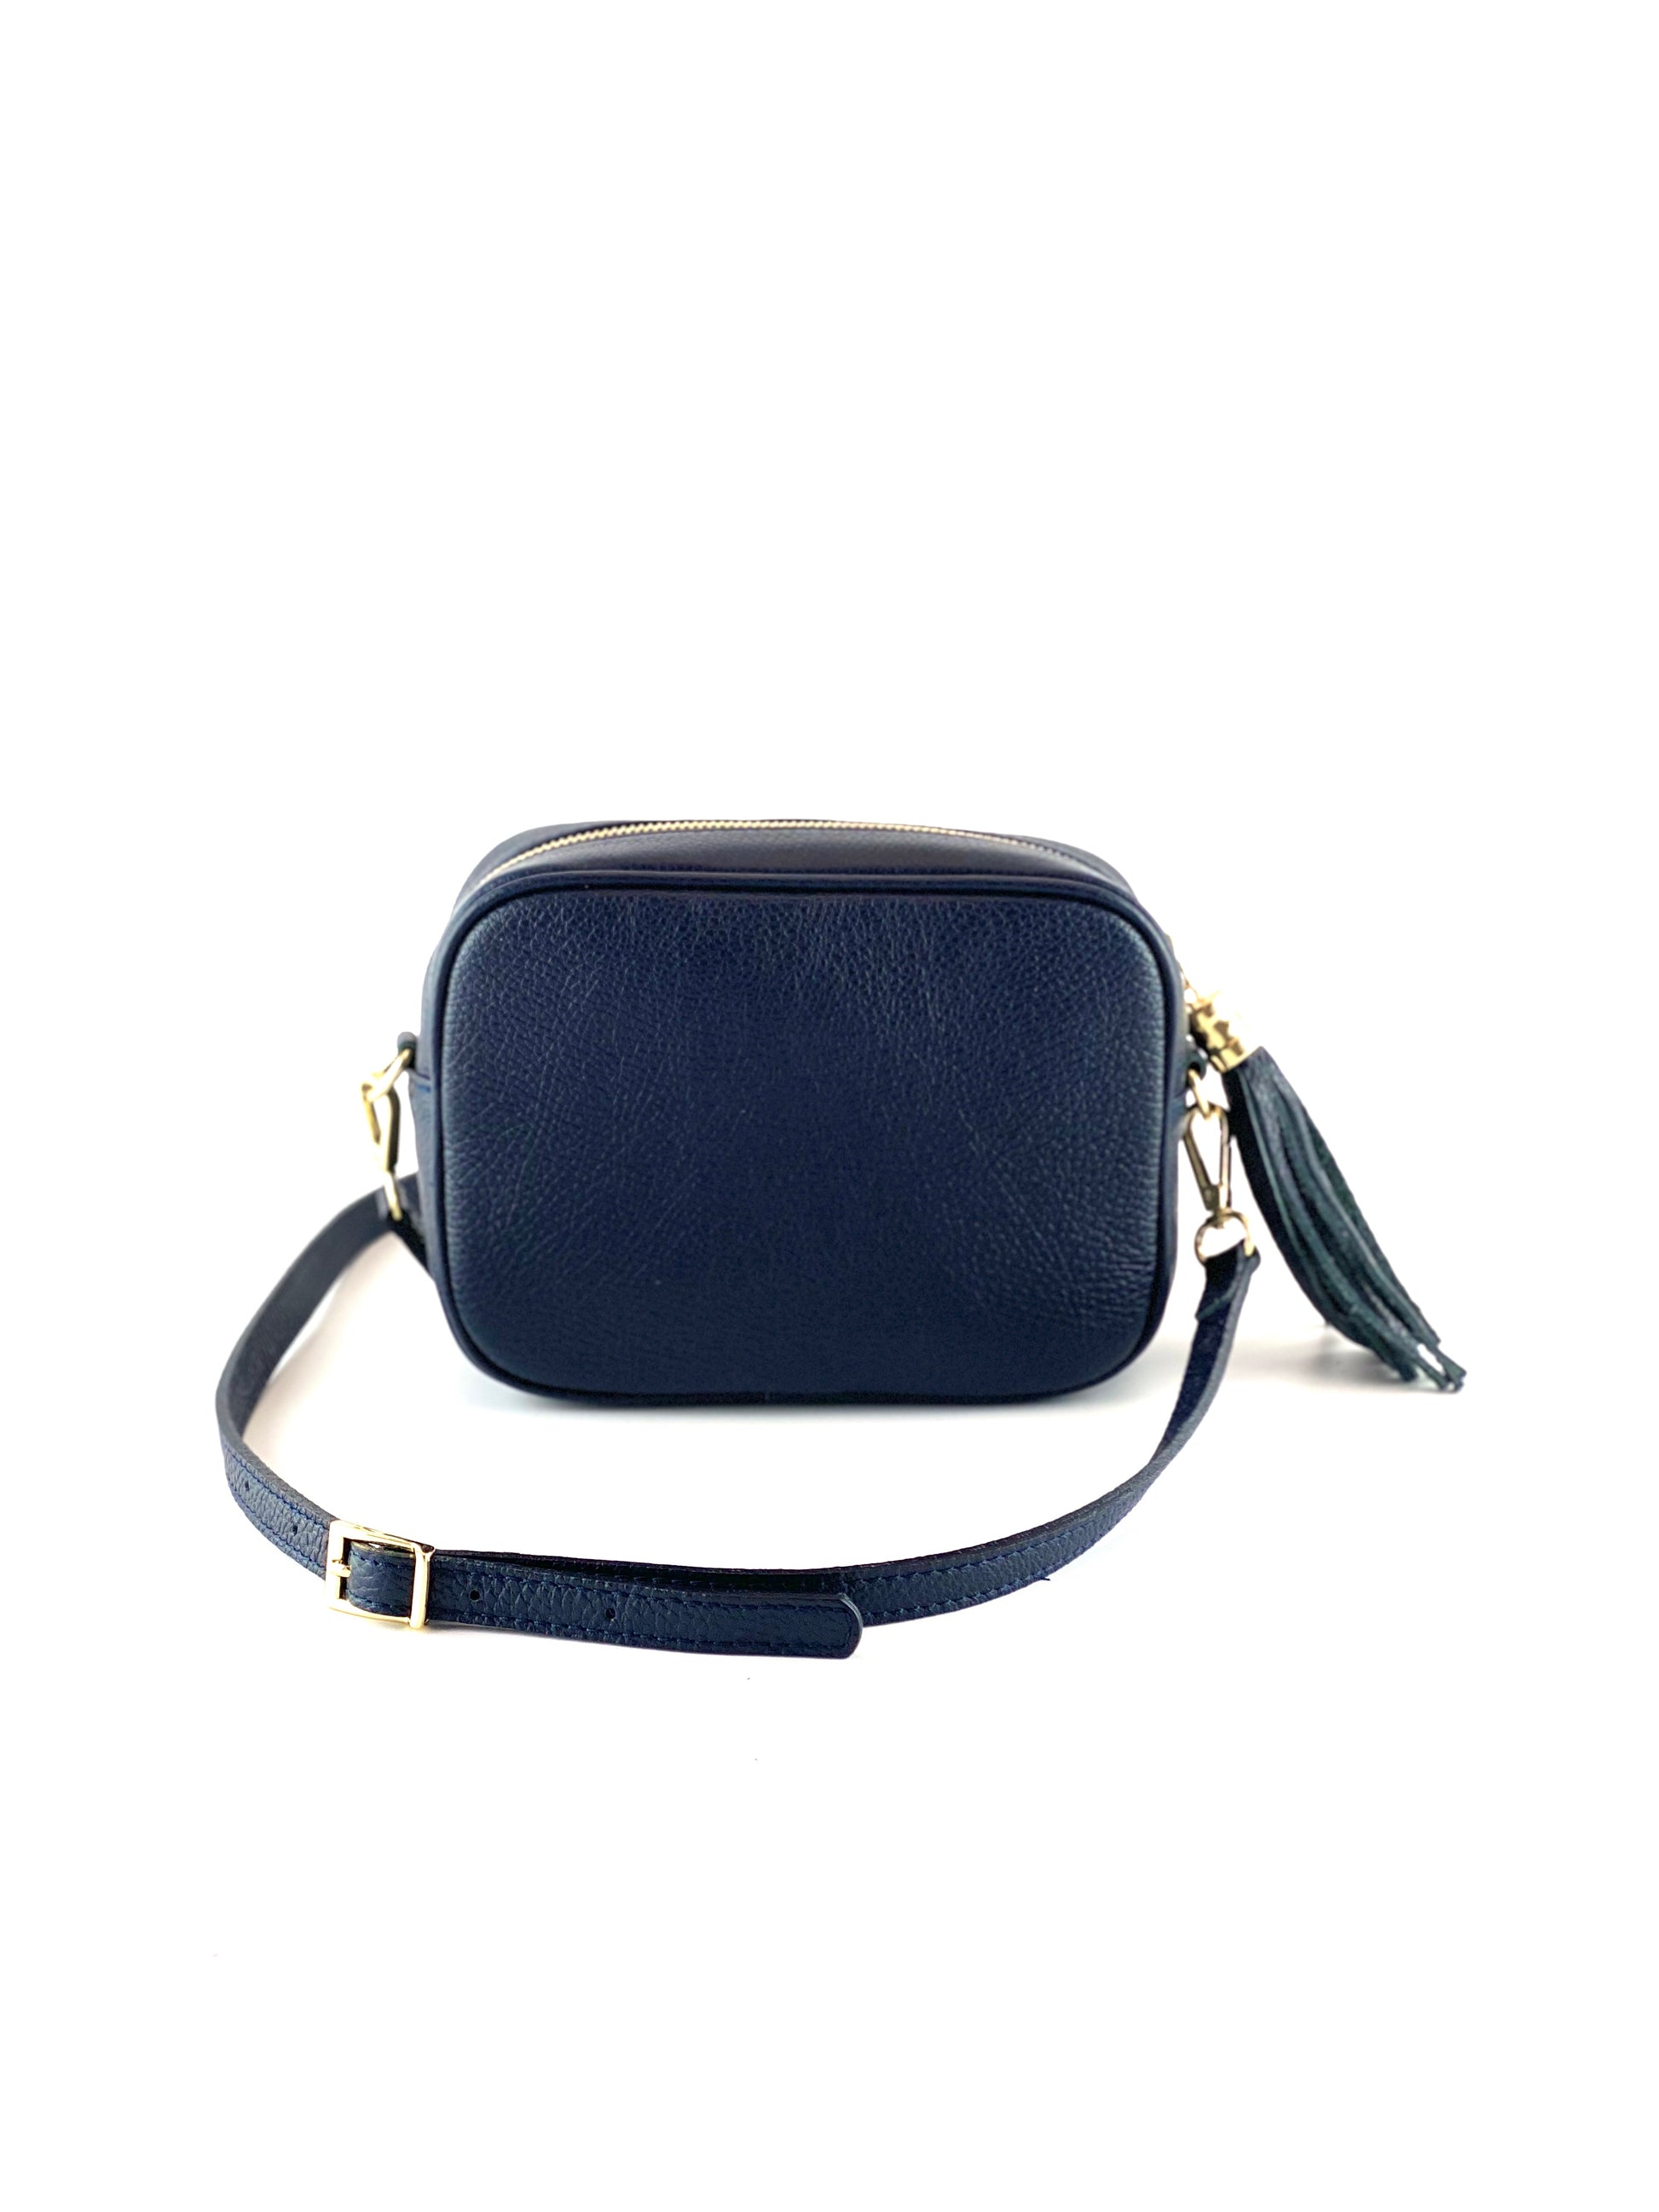 An image of a small navy blue leather messenger bag with a leather tassel on the zip which opens across the top of the bag.